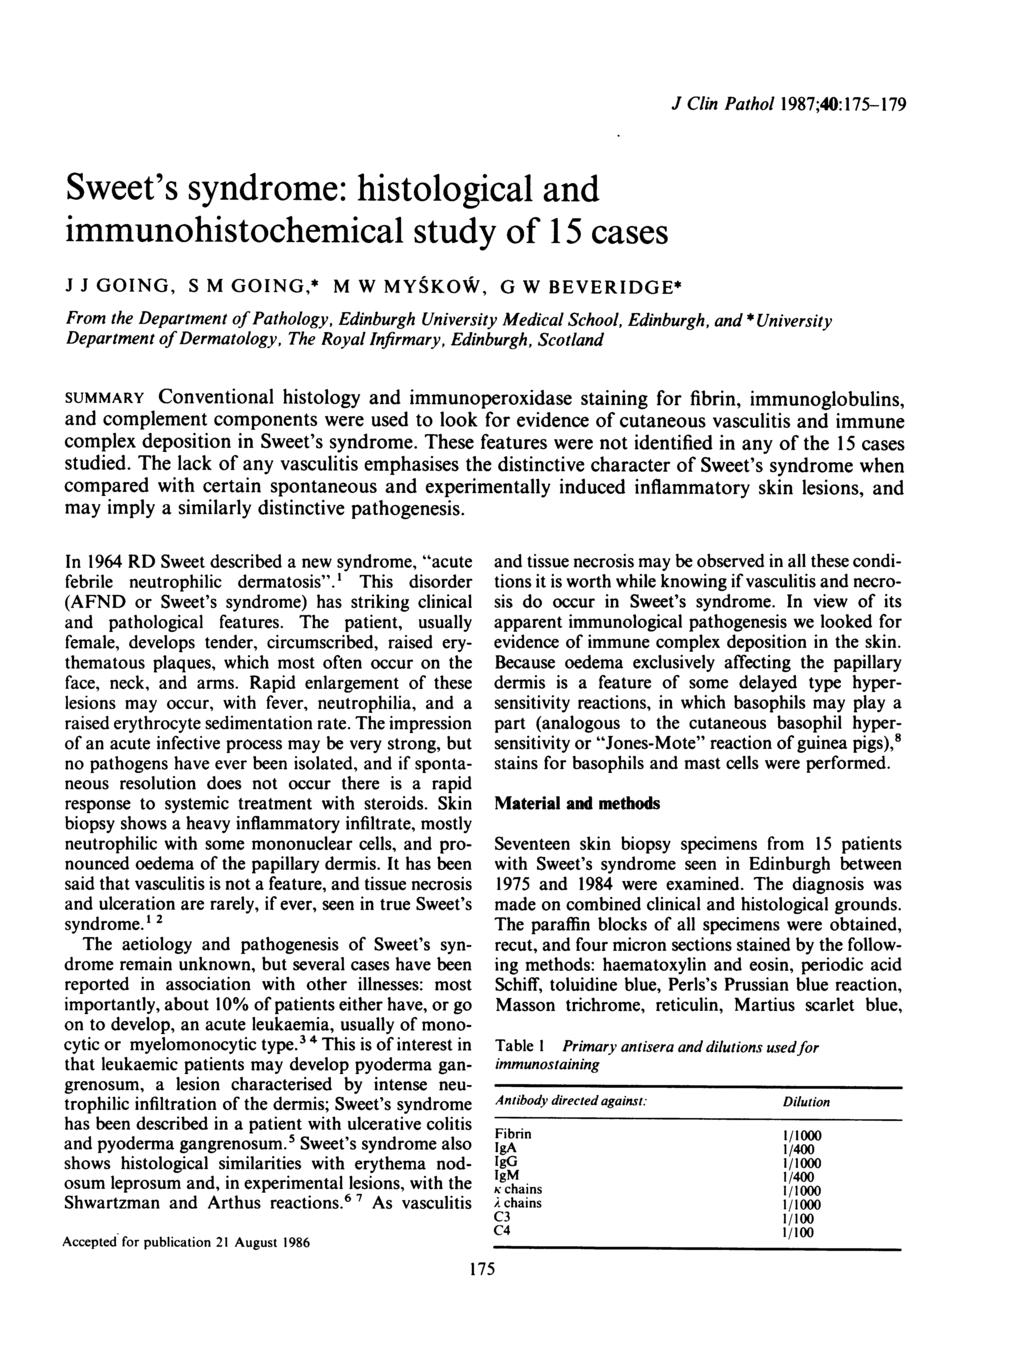 Sweet's syndrome: histological and immunohistochemical study of 15 cases J J GOING, S M GOING,* M W MYSKOW, G W BEVERIDGE* J Clin Pathol 1987;40:175-179 From the Department of Pathology, Edinburgh